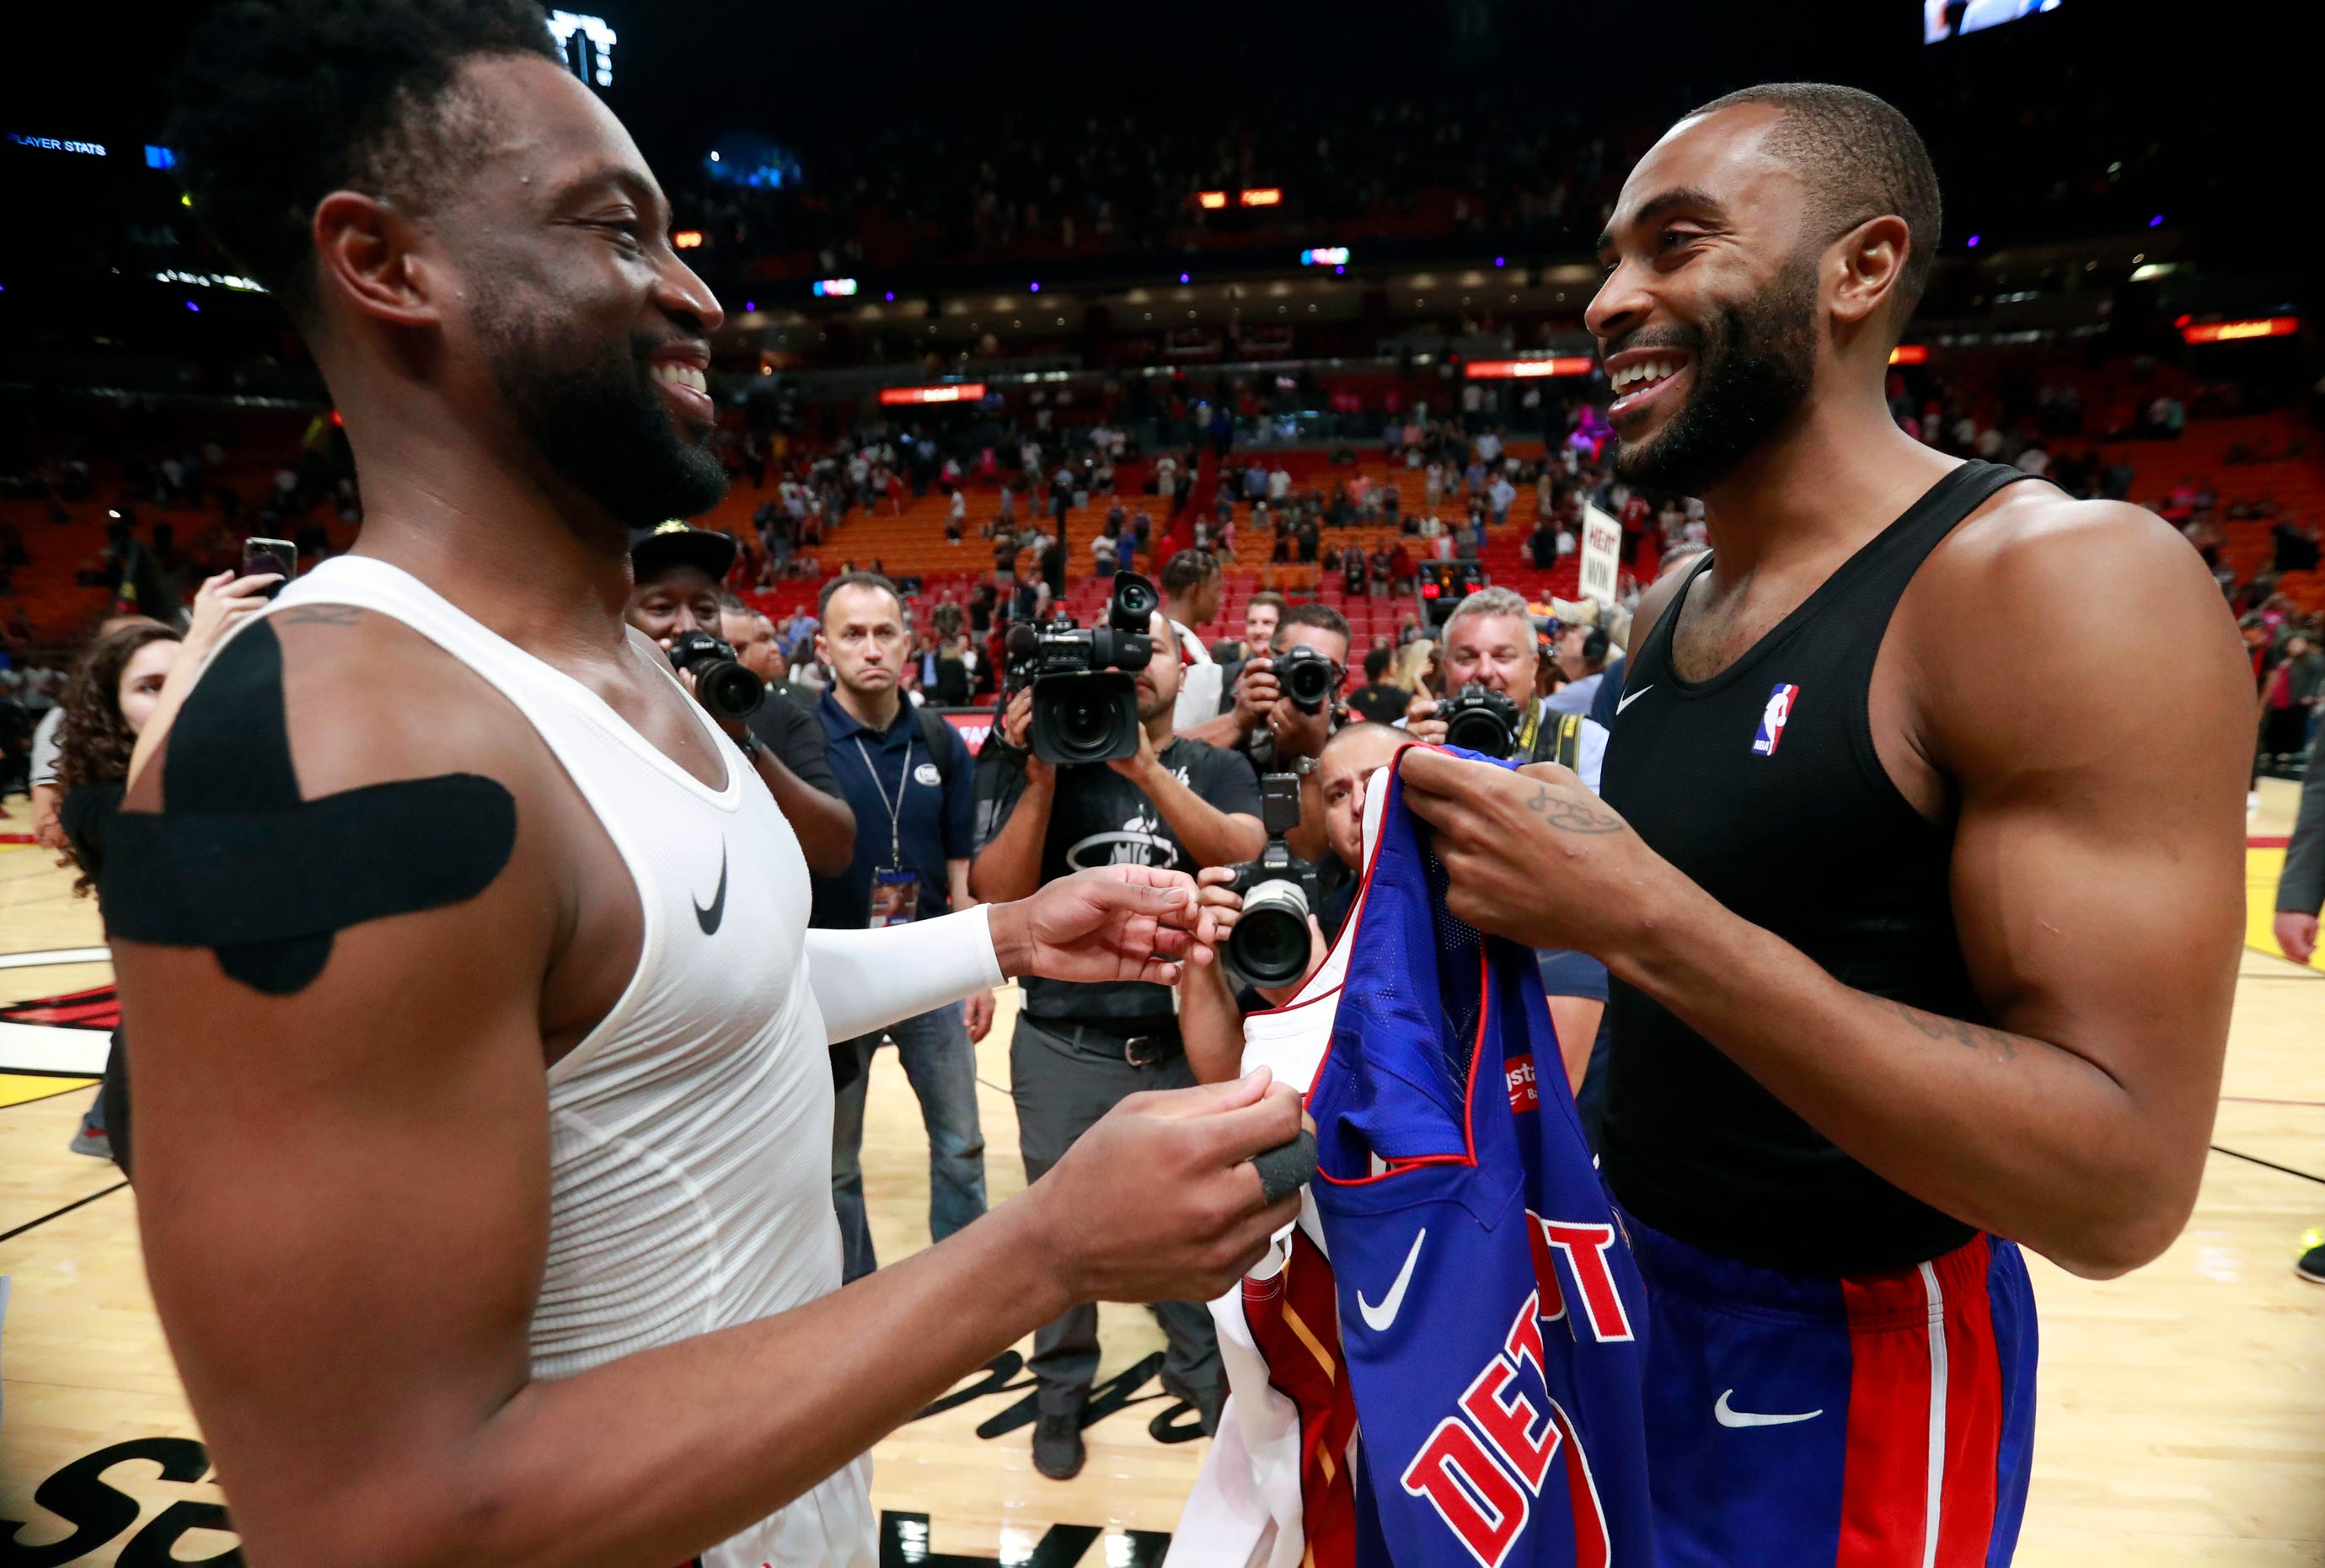 Miami Heat guard Dwyane Wade, left, and Detroit Pistons guard Wayne Ellington smile as they exchange jerseys after the game.